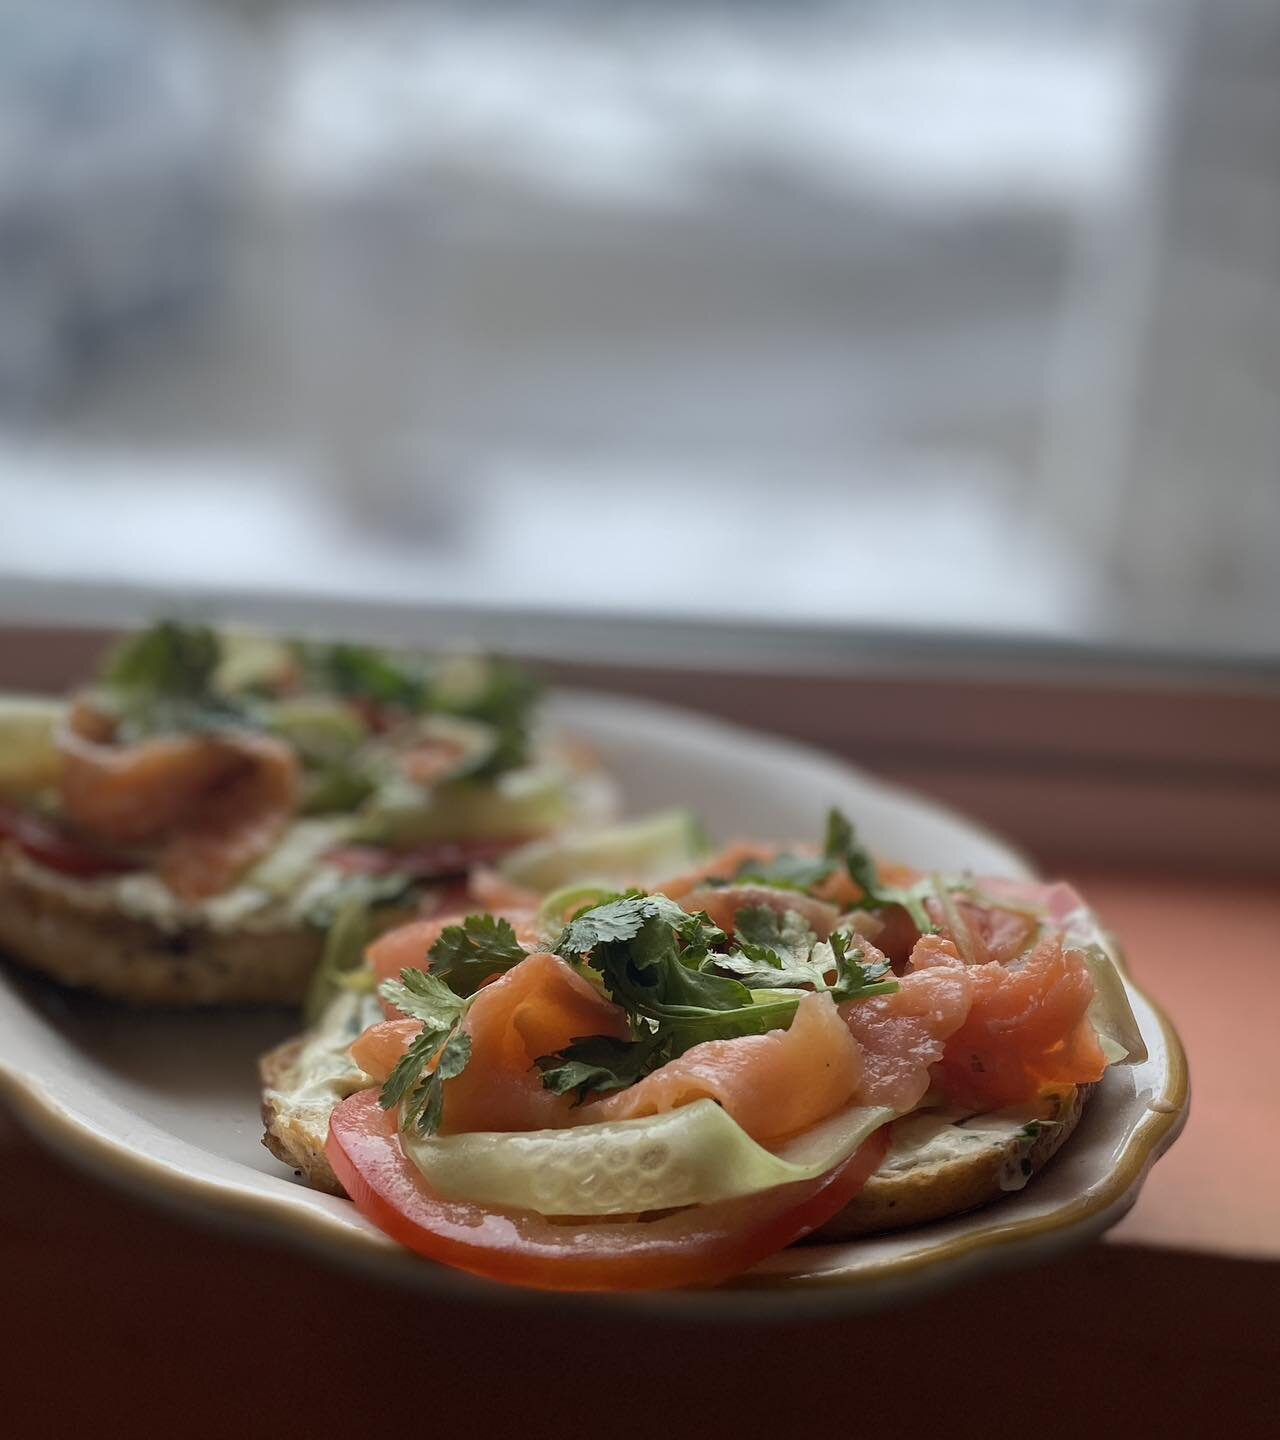 🥯 Schmear-lantro Salmon Bagel Special🥯 
Smoked Salmon, Cilantro-Hot Shot Cream Cheese, Tomato, Cucumber, Scallion, Fresh Cilantro on our very own house made bagels. 💪

All weekend! 

Other flavored cream cheeses available are: Maple Bacon 🥓 , Str